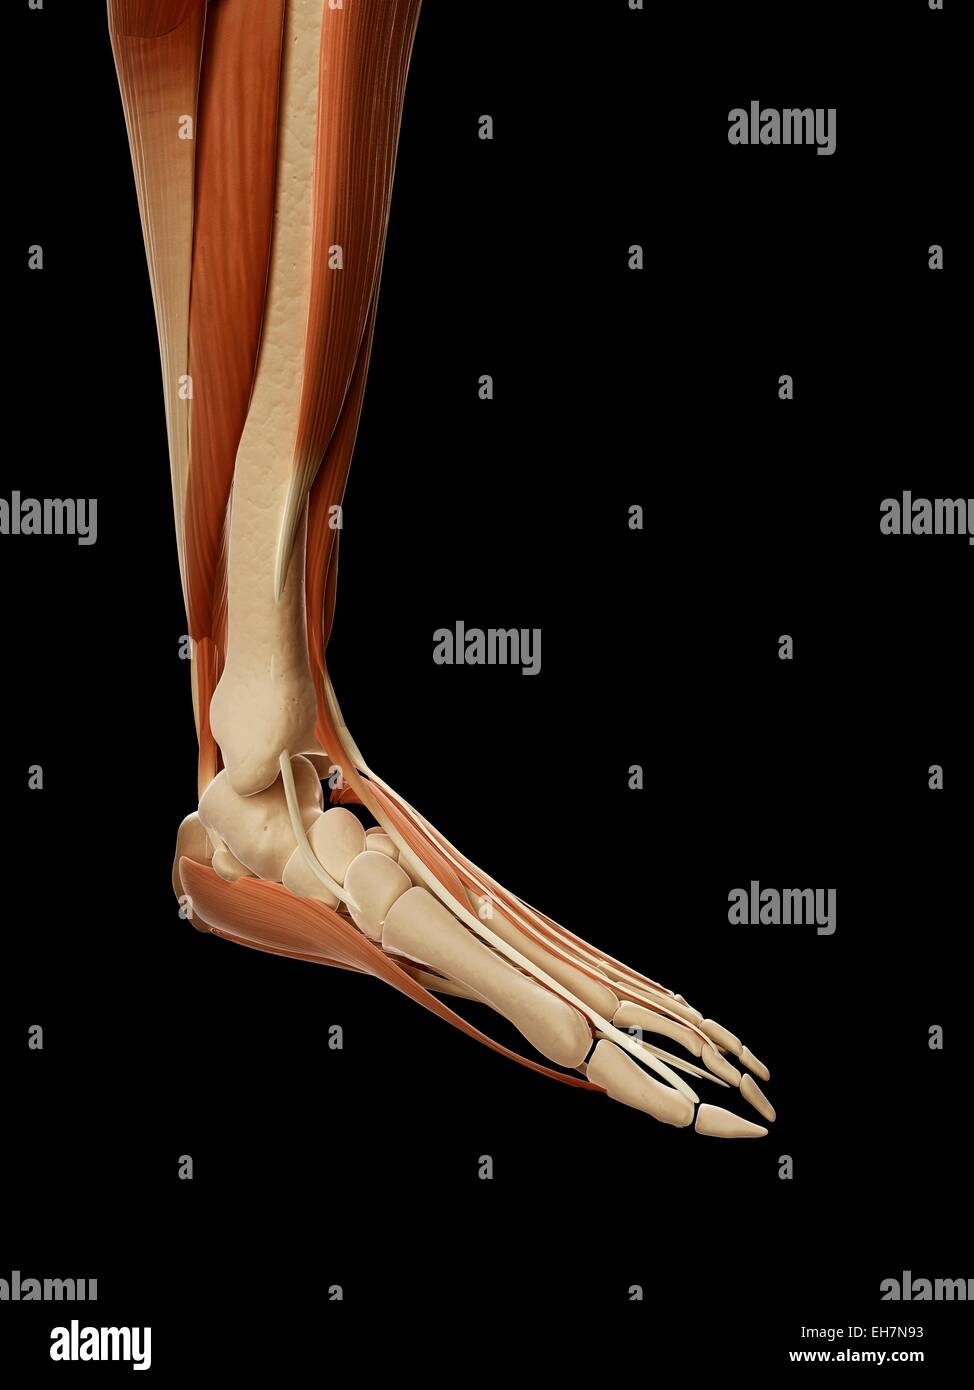 Human leg and foot muscles, illustration Stock Photo